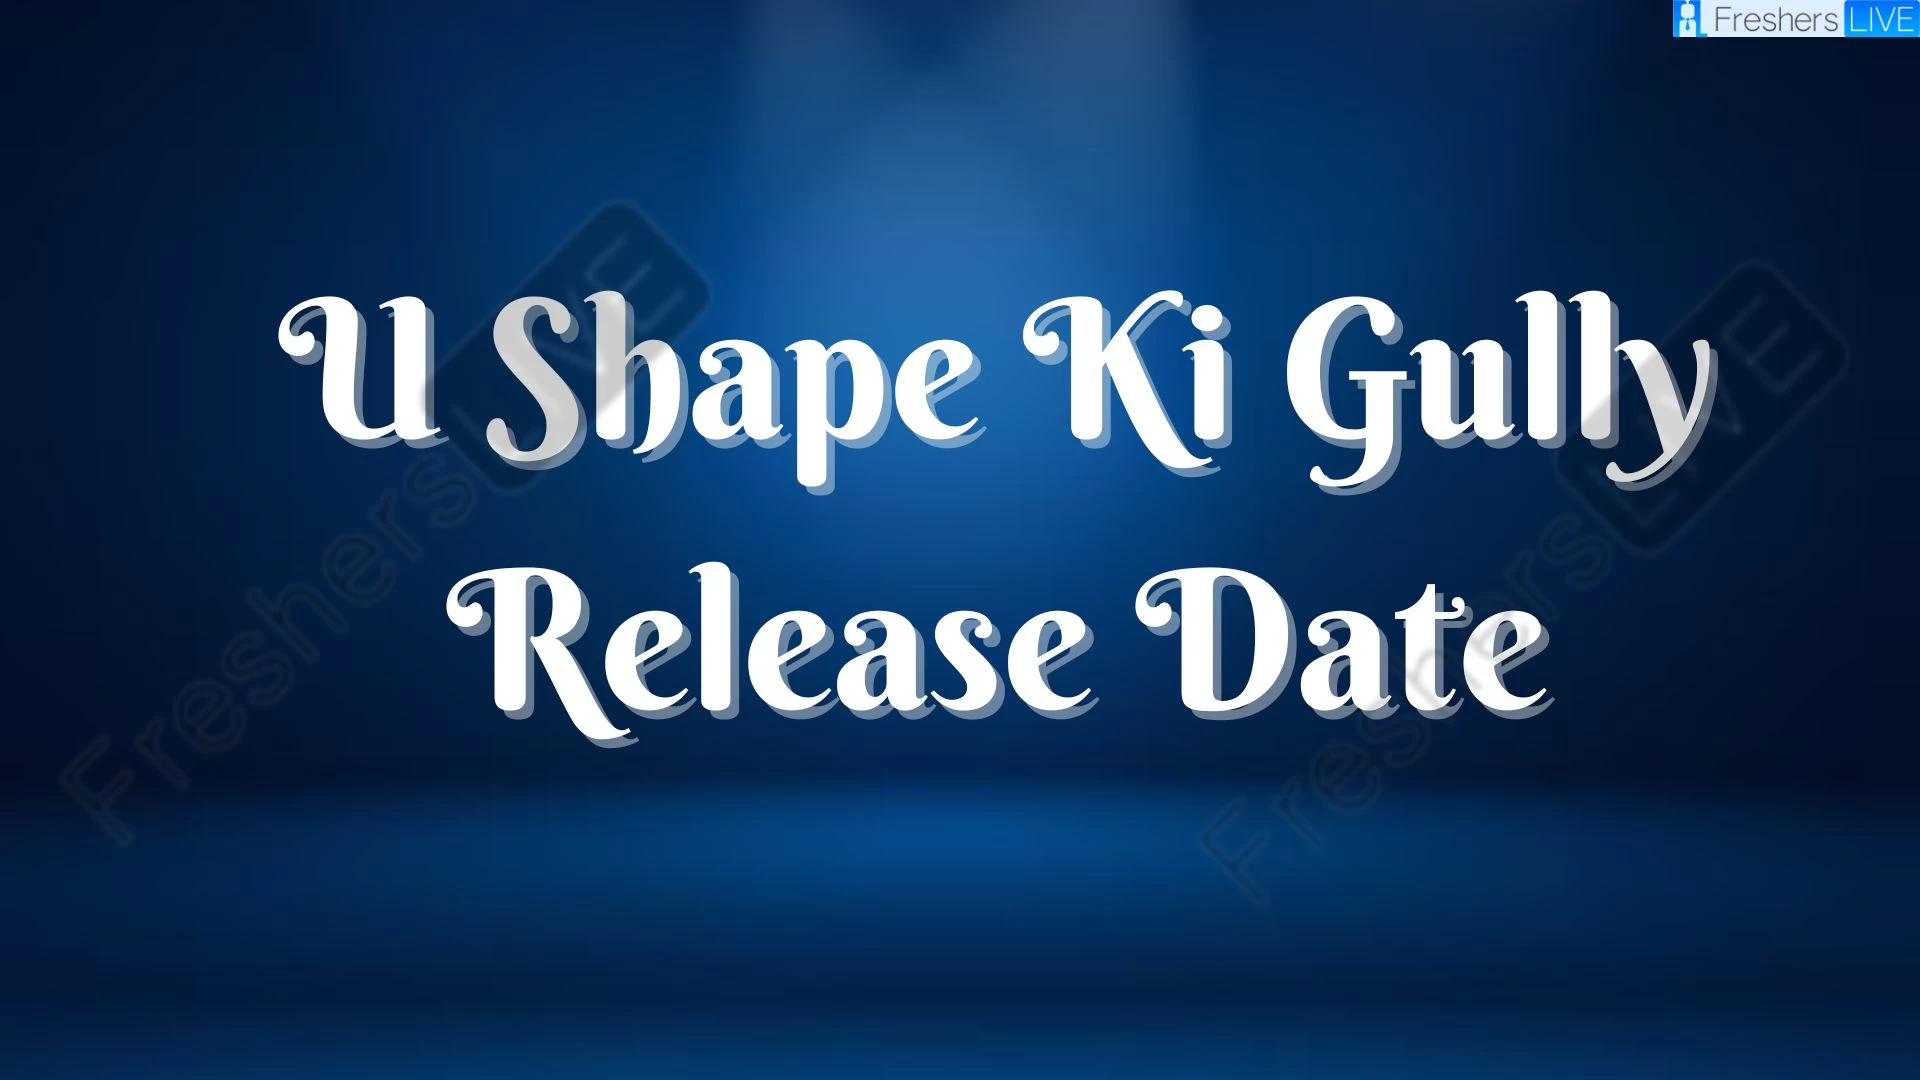 U Shape Ki Gully Movie Release Date and Time 2023, Countdown, Cast, Trailer, and More!